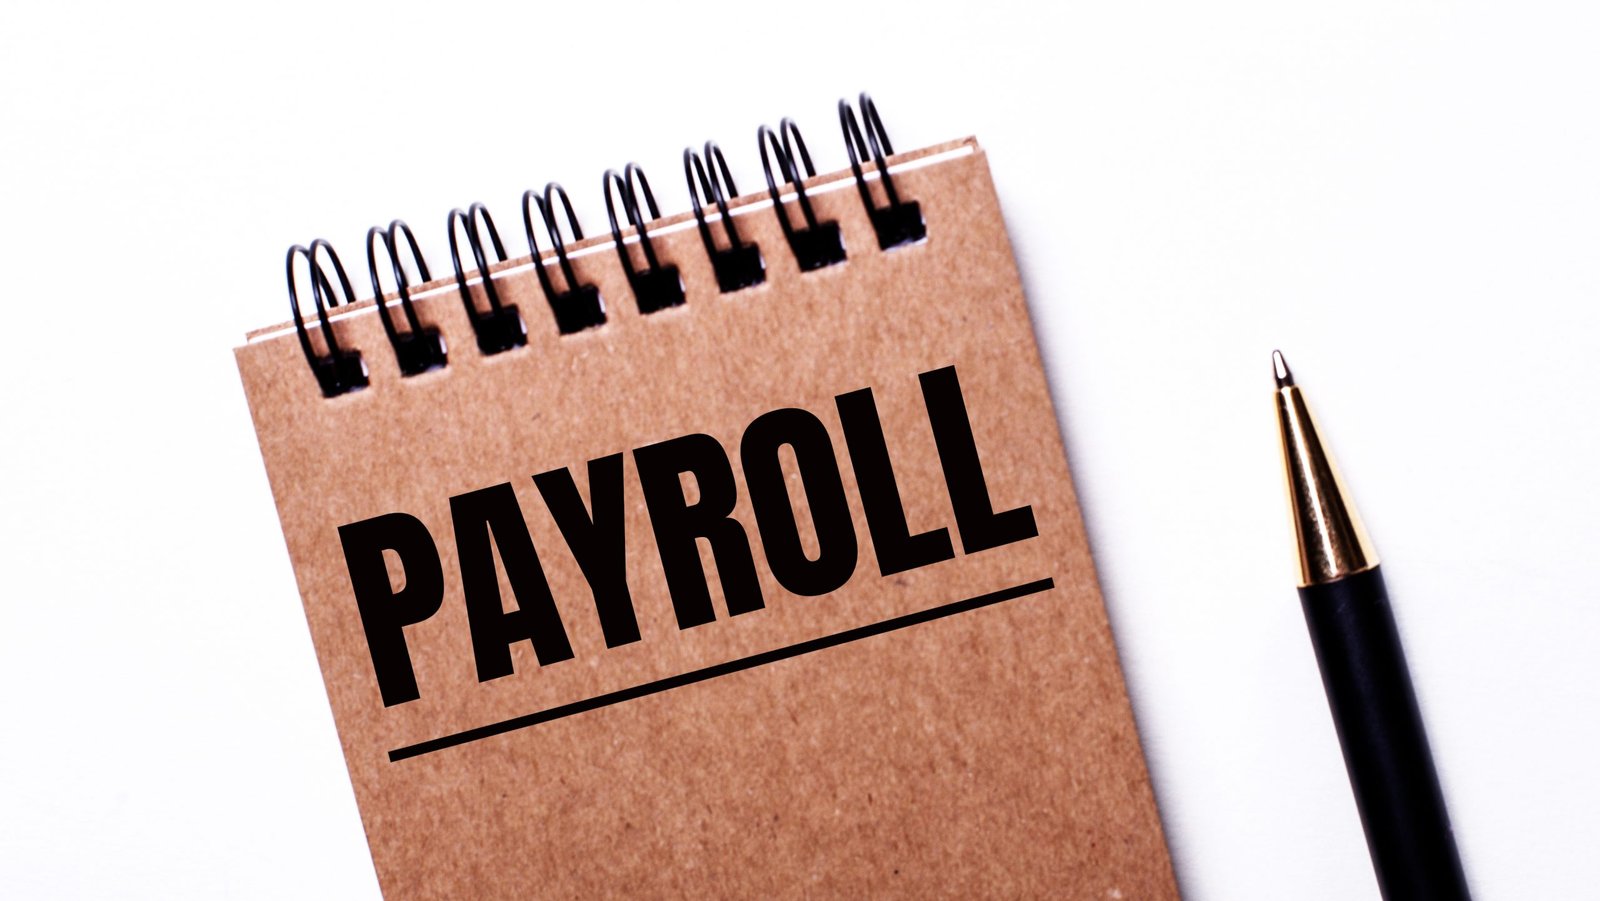 payroll-services-for-your-business-articlesdo